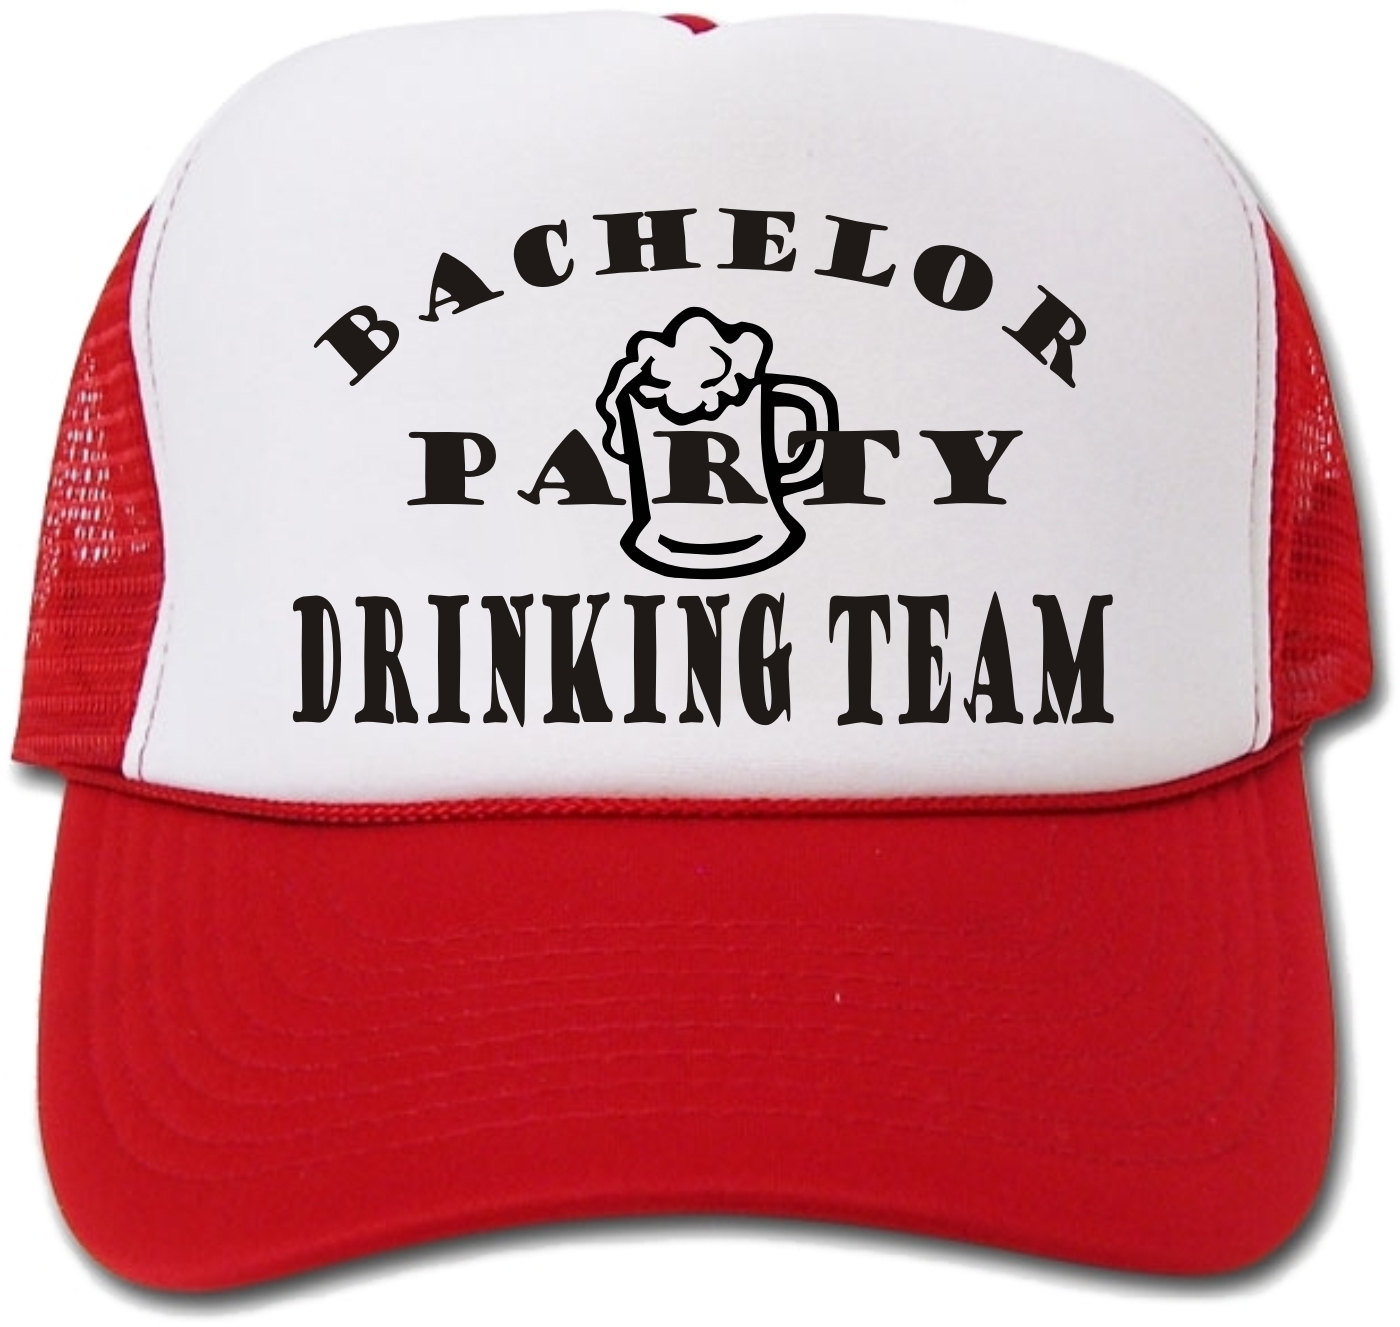 Bachelor Party Drinking Team Hat/Cap